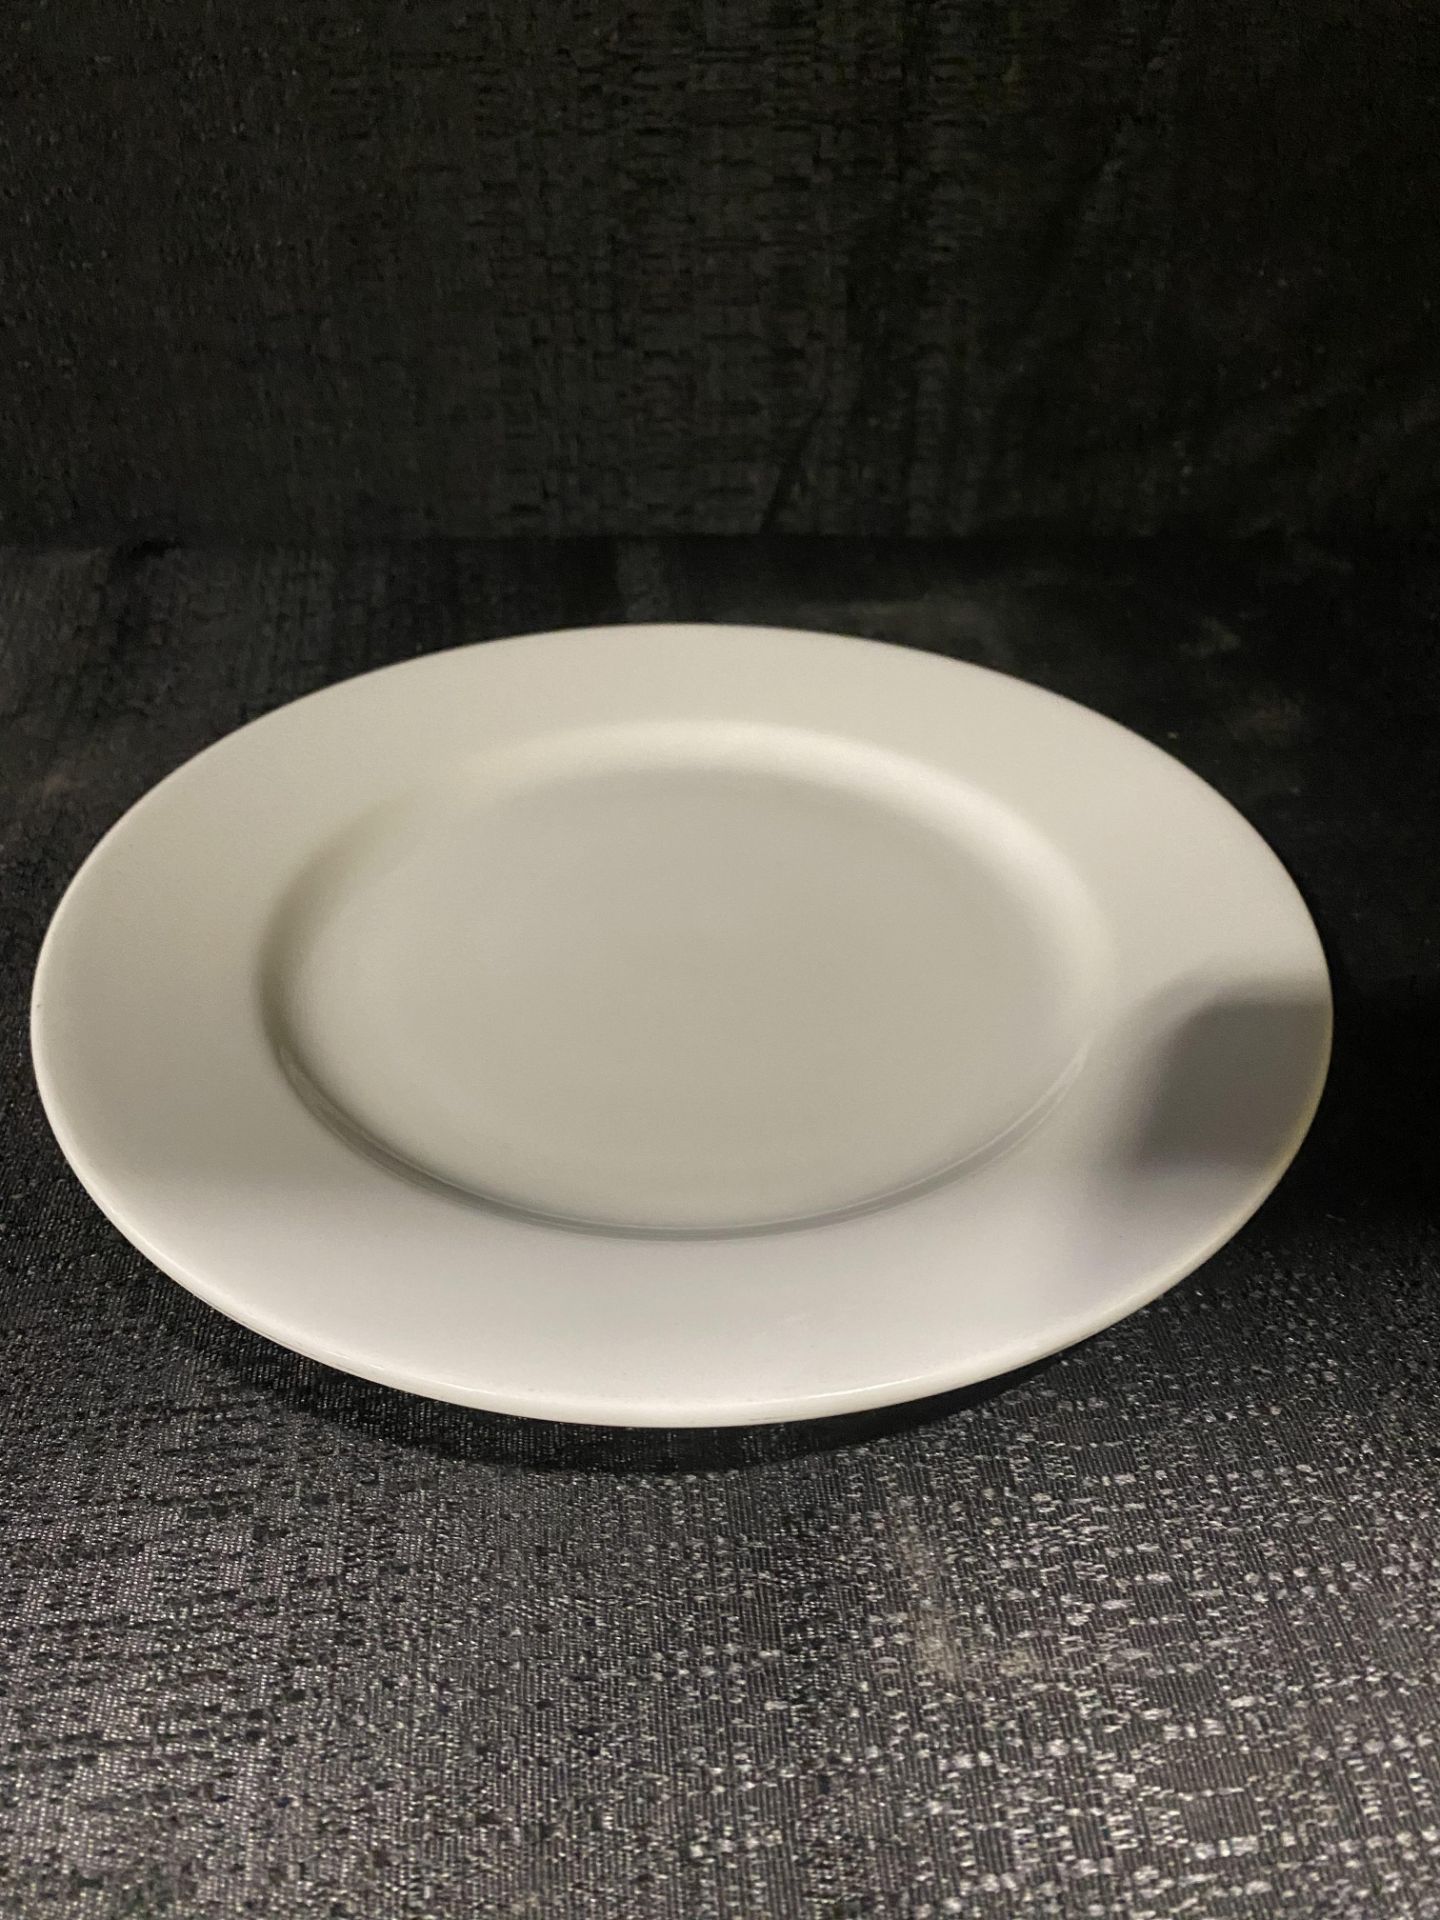 (50) 9.5" Salad/Dessert Plates White China Sant Andrea (BRING PACKING MATERIAL)